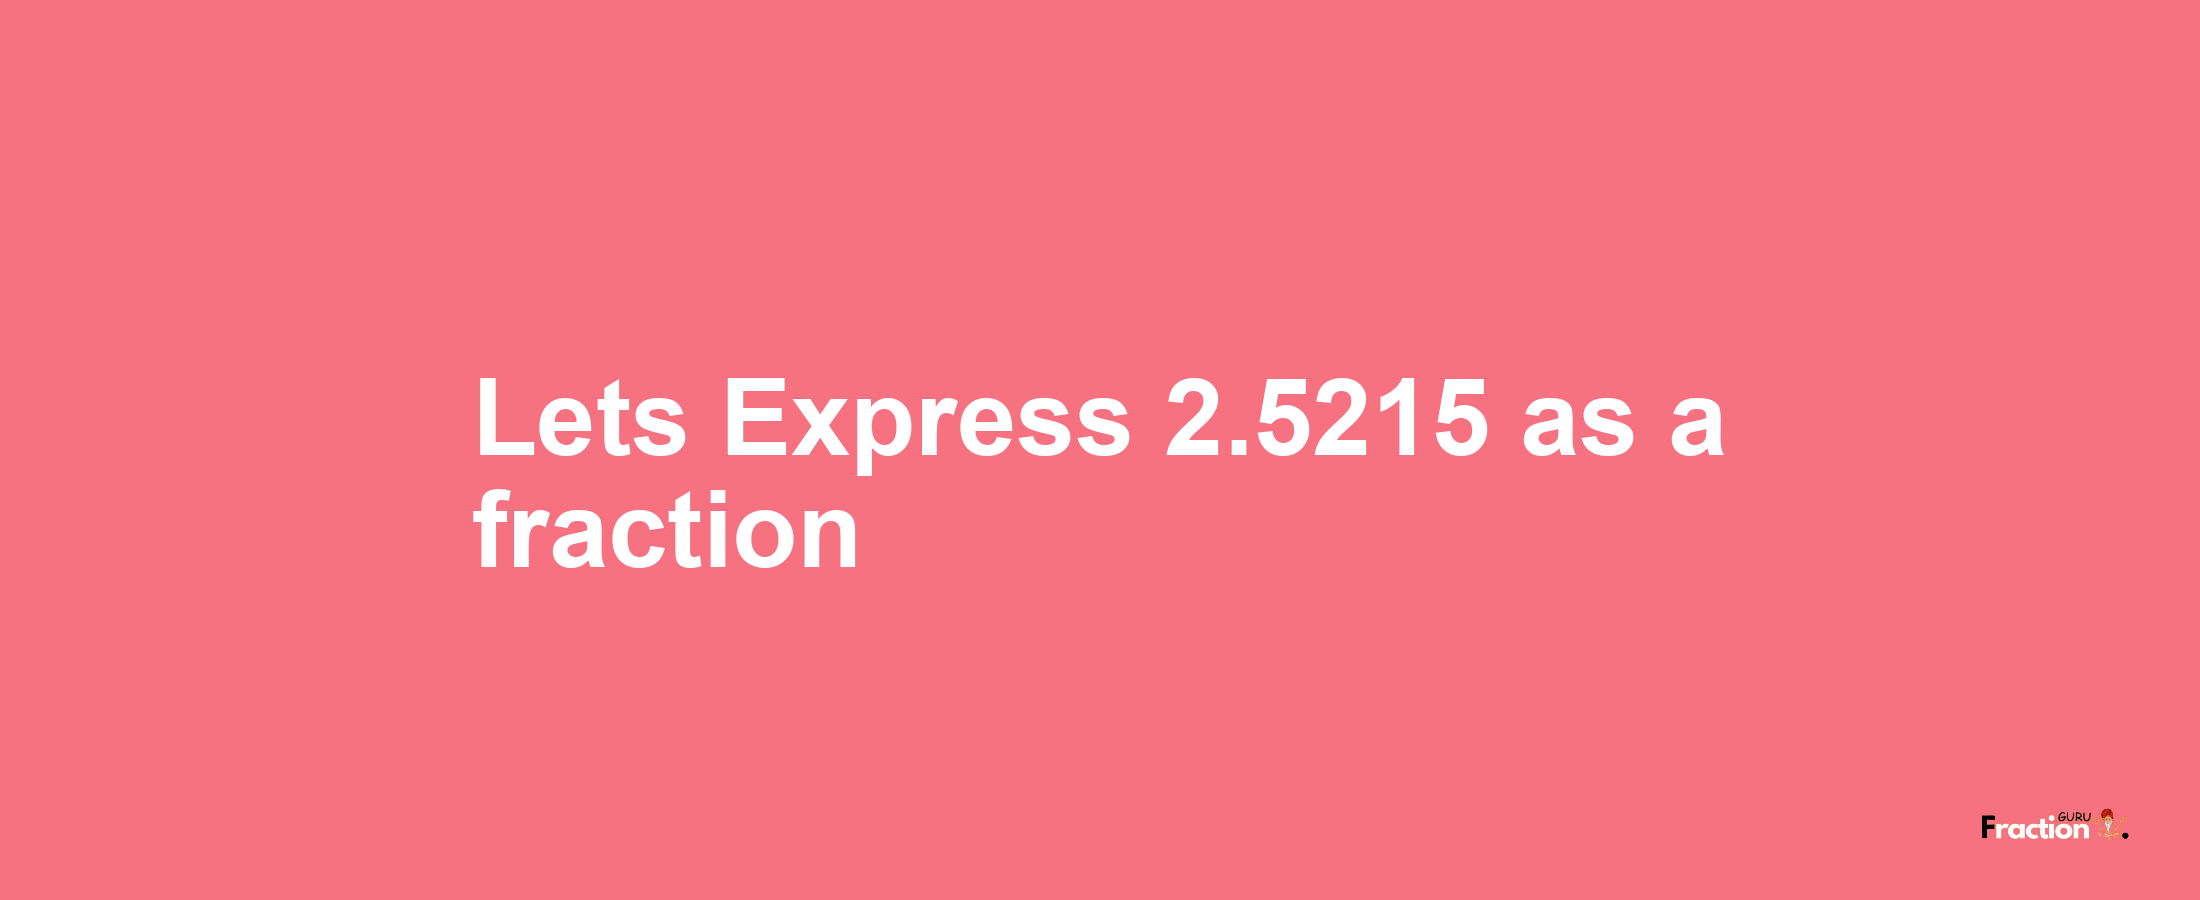 Lets Express 2.5215 as afraction